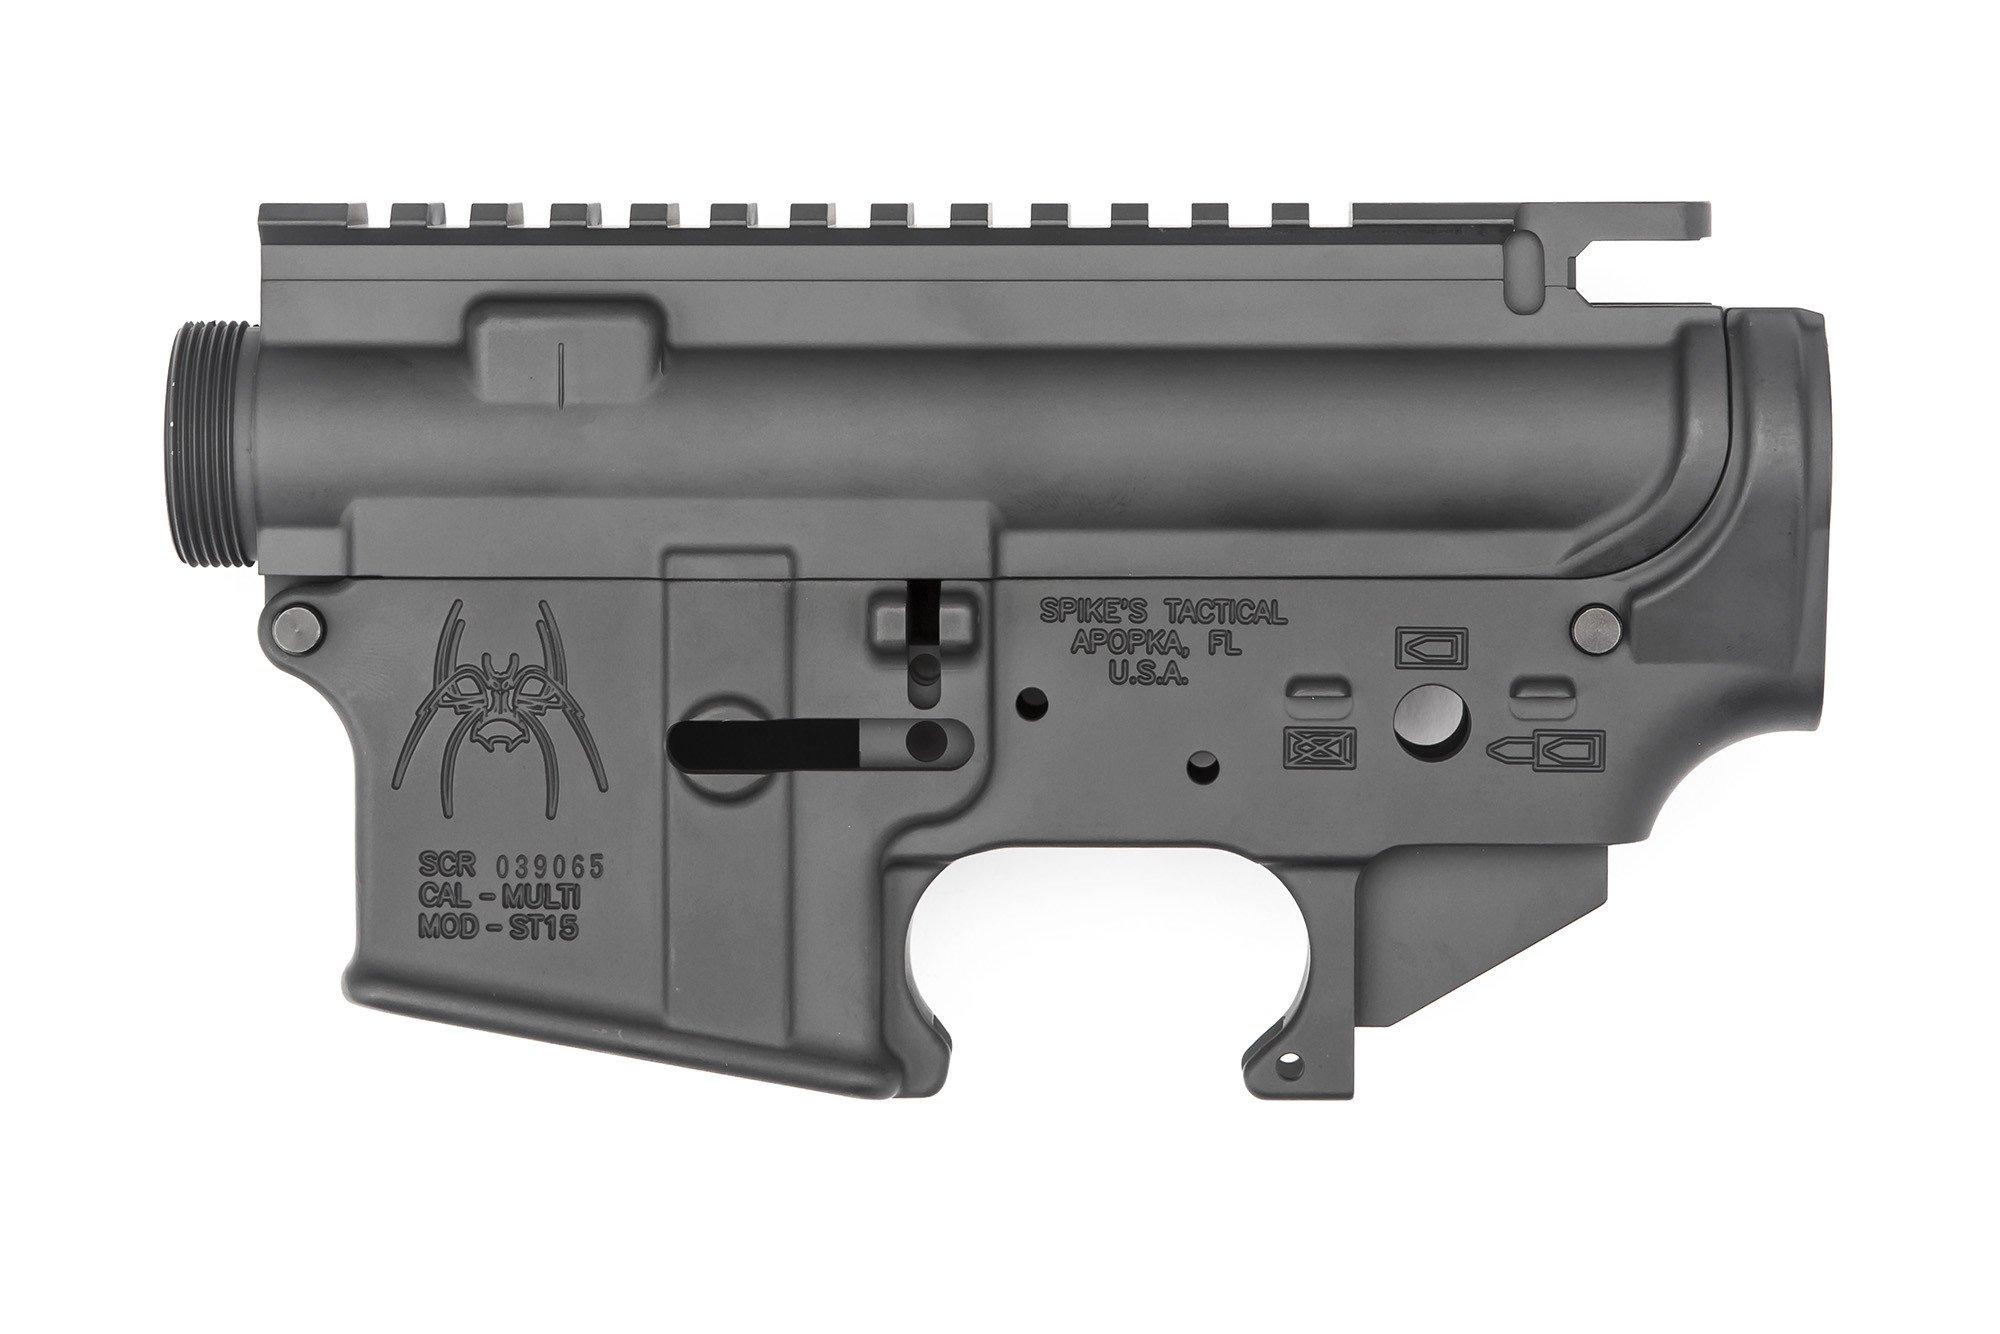  Spikes Tactical Spider Upper/Lower Set Cerakote Gray Sts1515